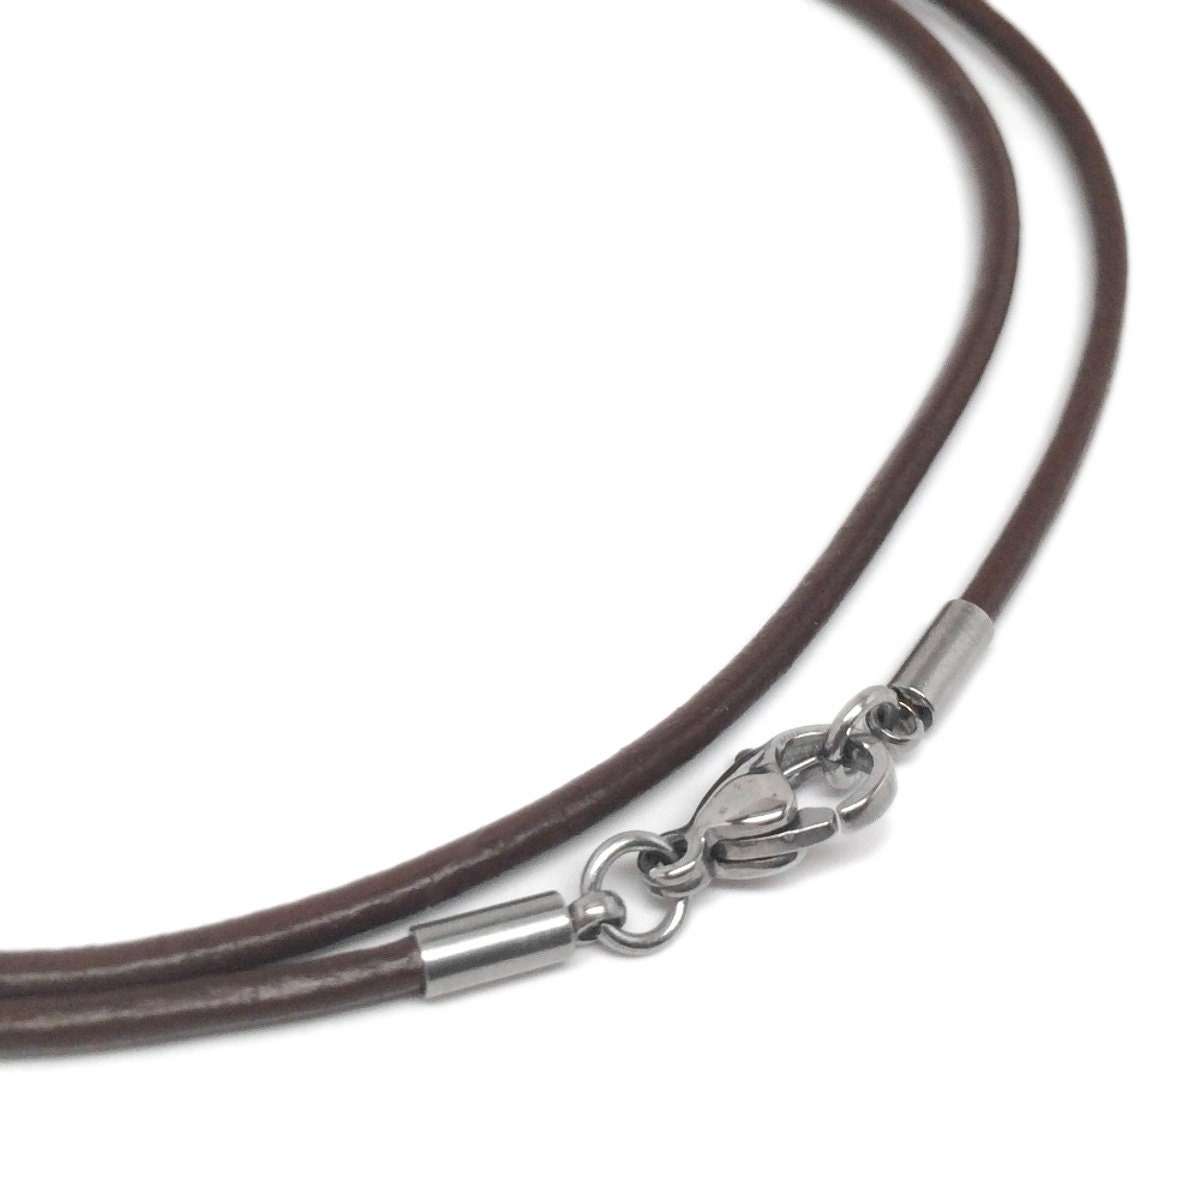 3mm Braided Leather Necklace, Braided Bolo Leather Cord Necklace, Stainless  Steel Clasp, Natural, Grey, Brown and Black Leather Necklace Men 